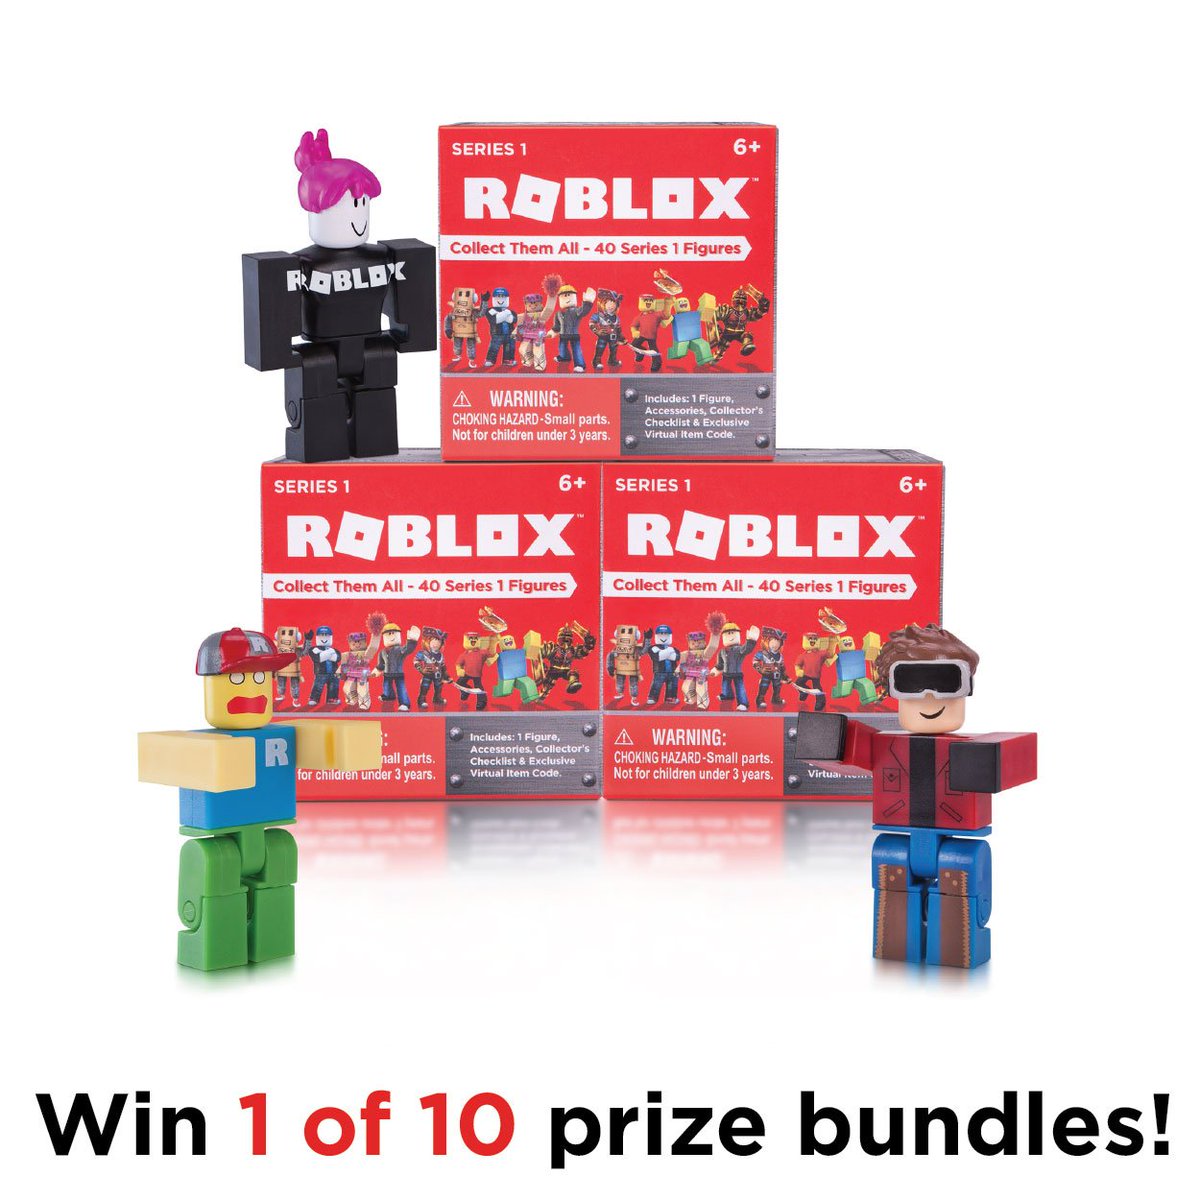 Smyths Toys Ireland On Twitter Last Chance To Win 1 Of 10 - roblox toys smyths